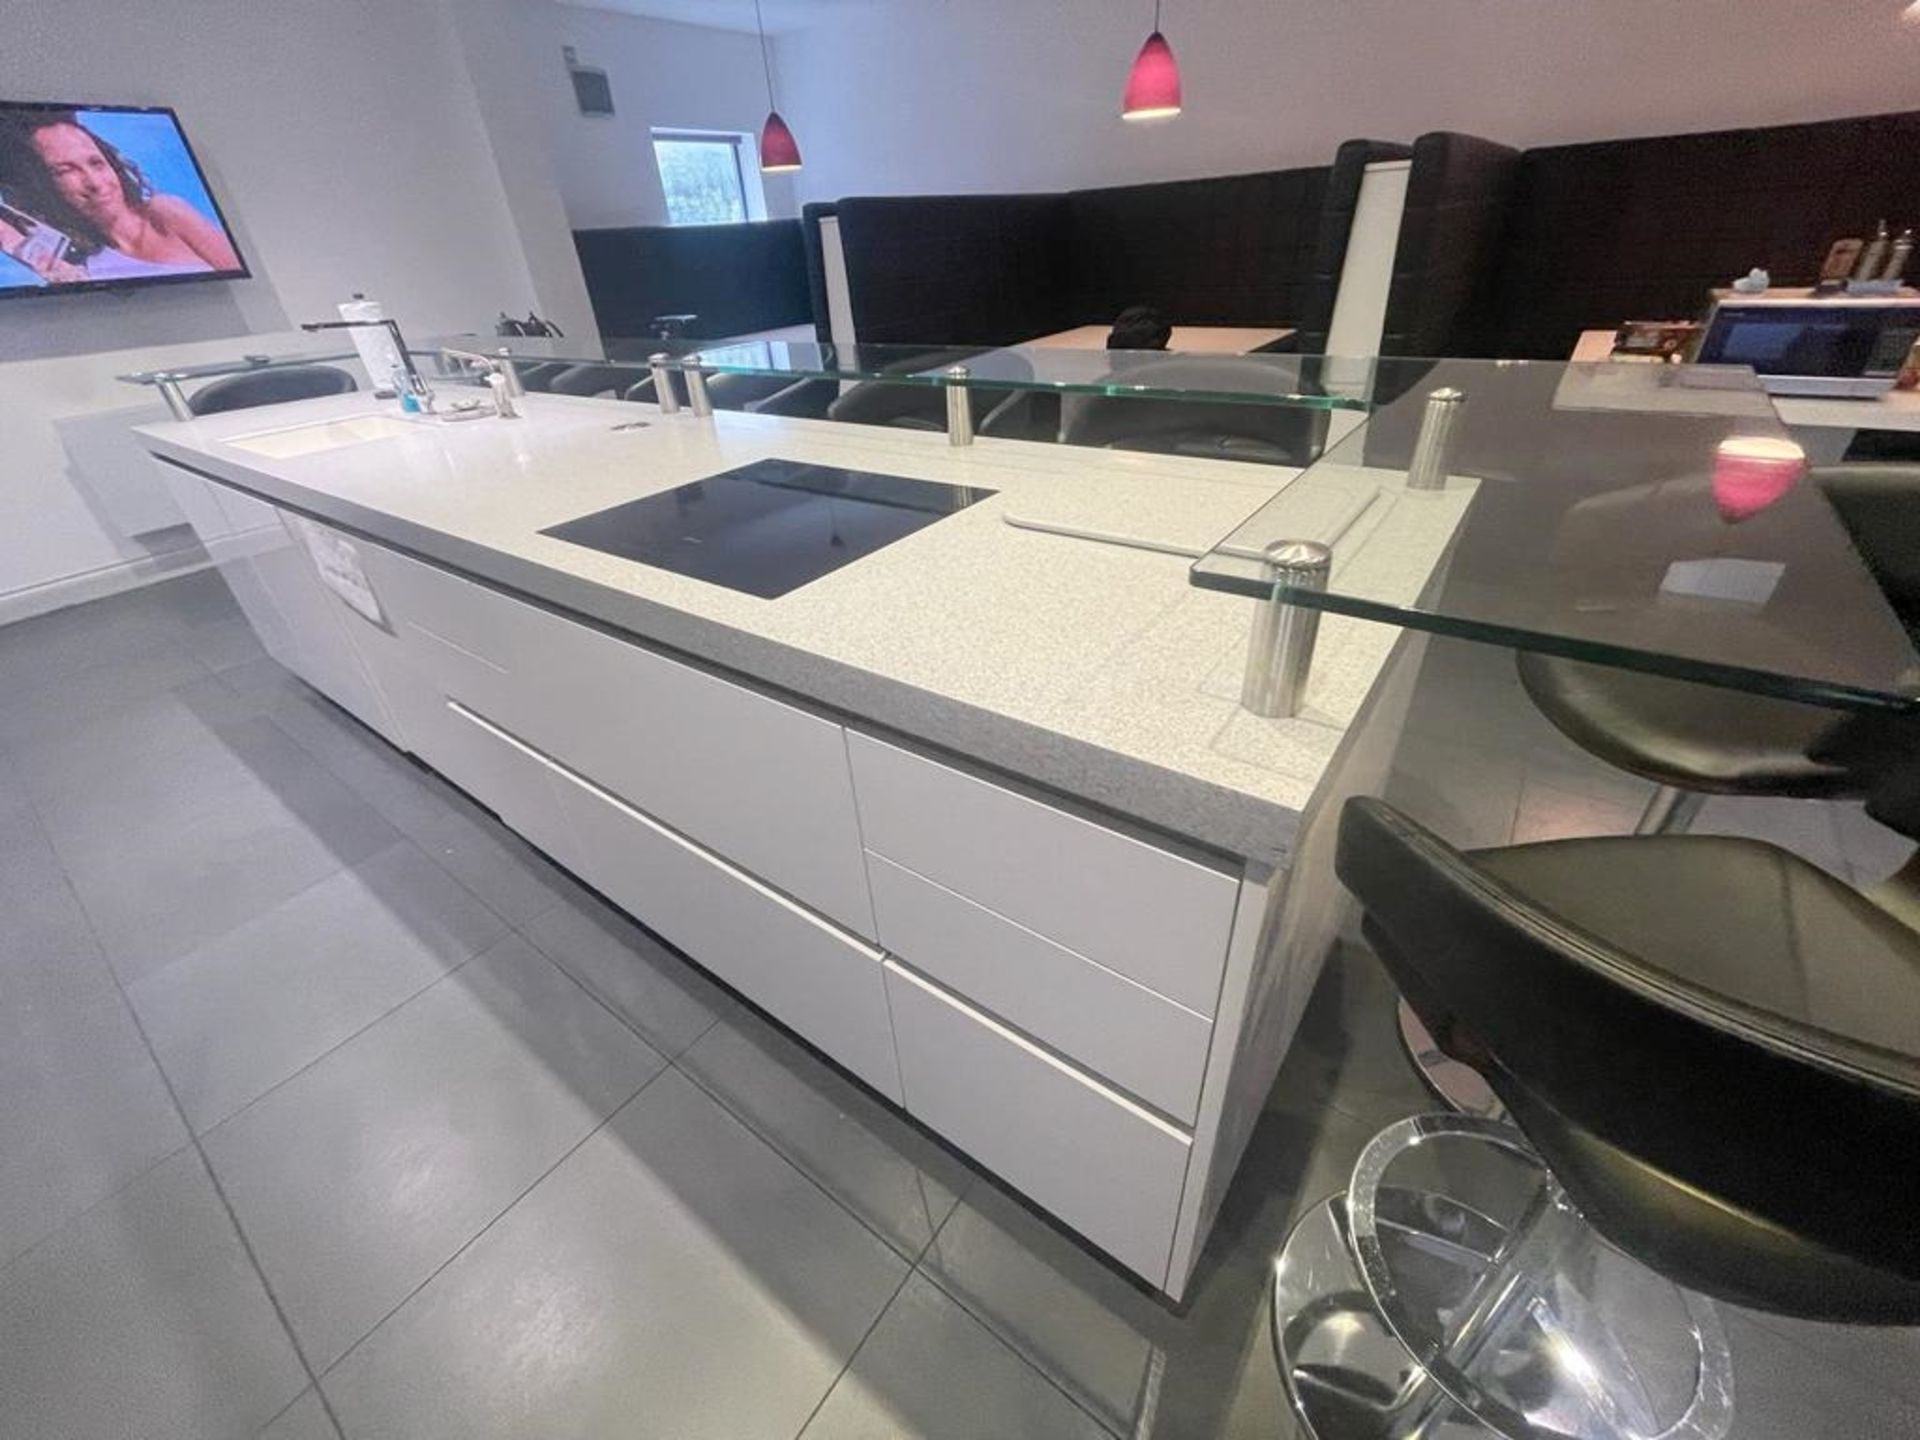 1 x SIEMATIC Bespoke Handleless Gloss Fitted Kitchen with 3.6m Island, Appliances & Granite Worktops - Image 11 of 117